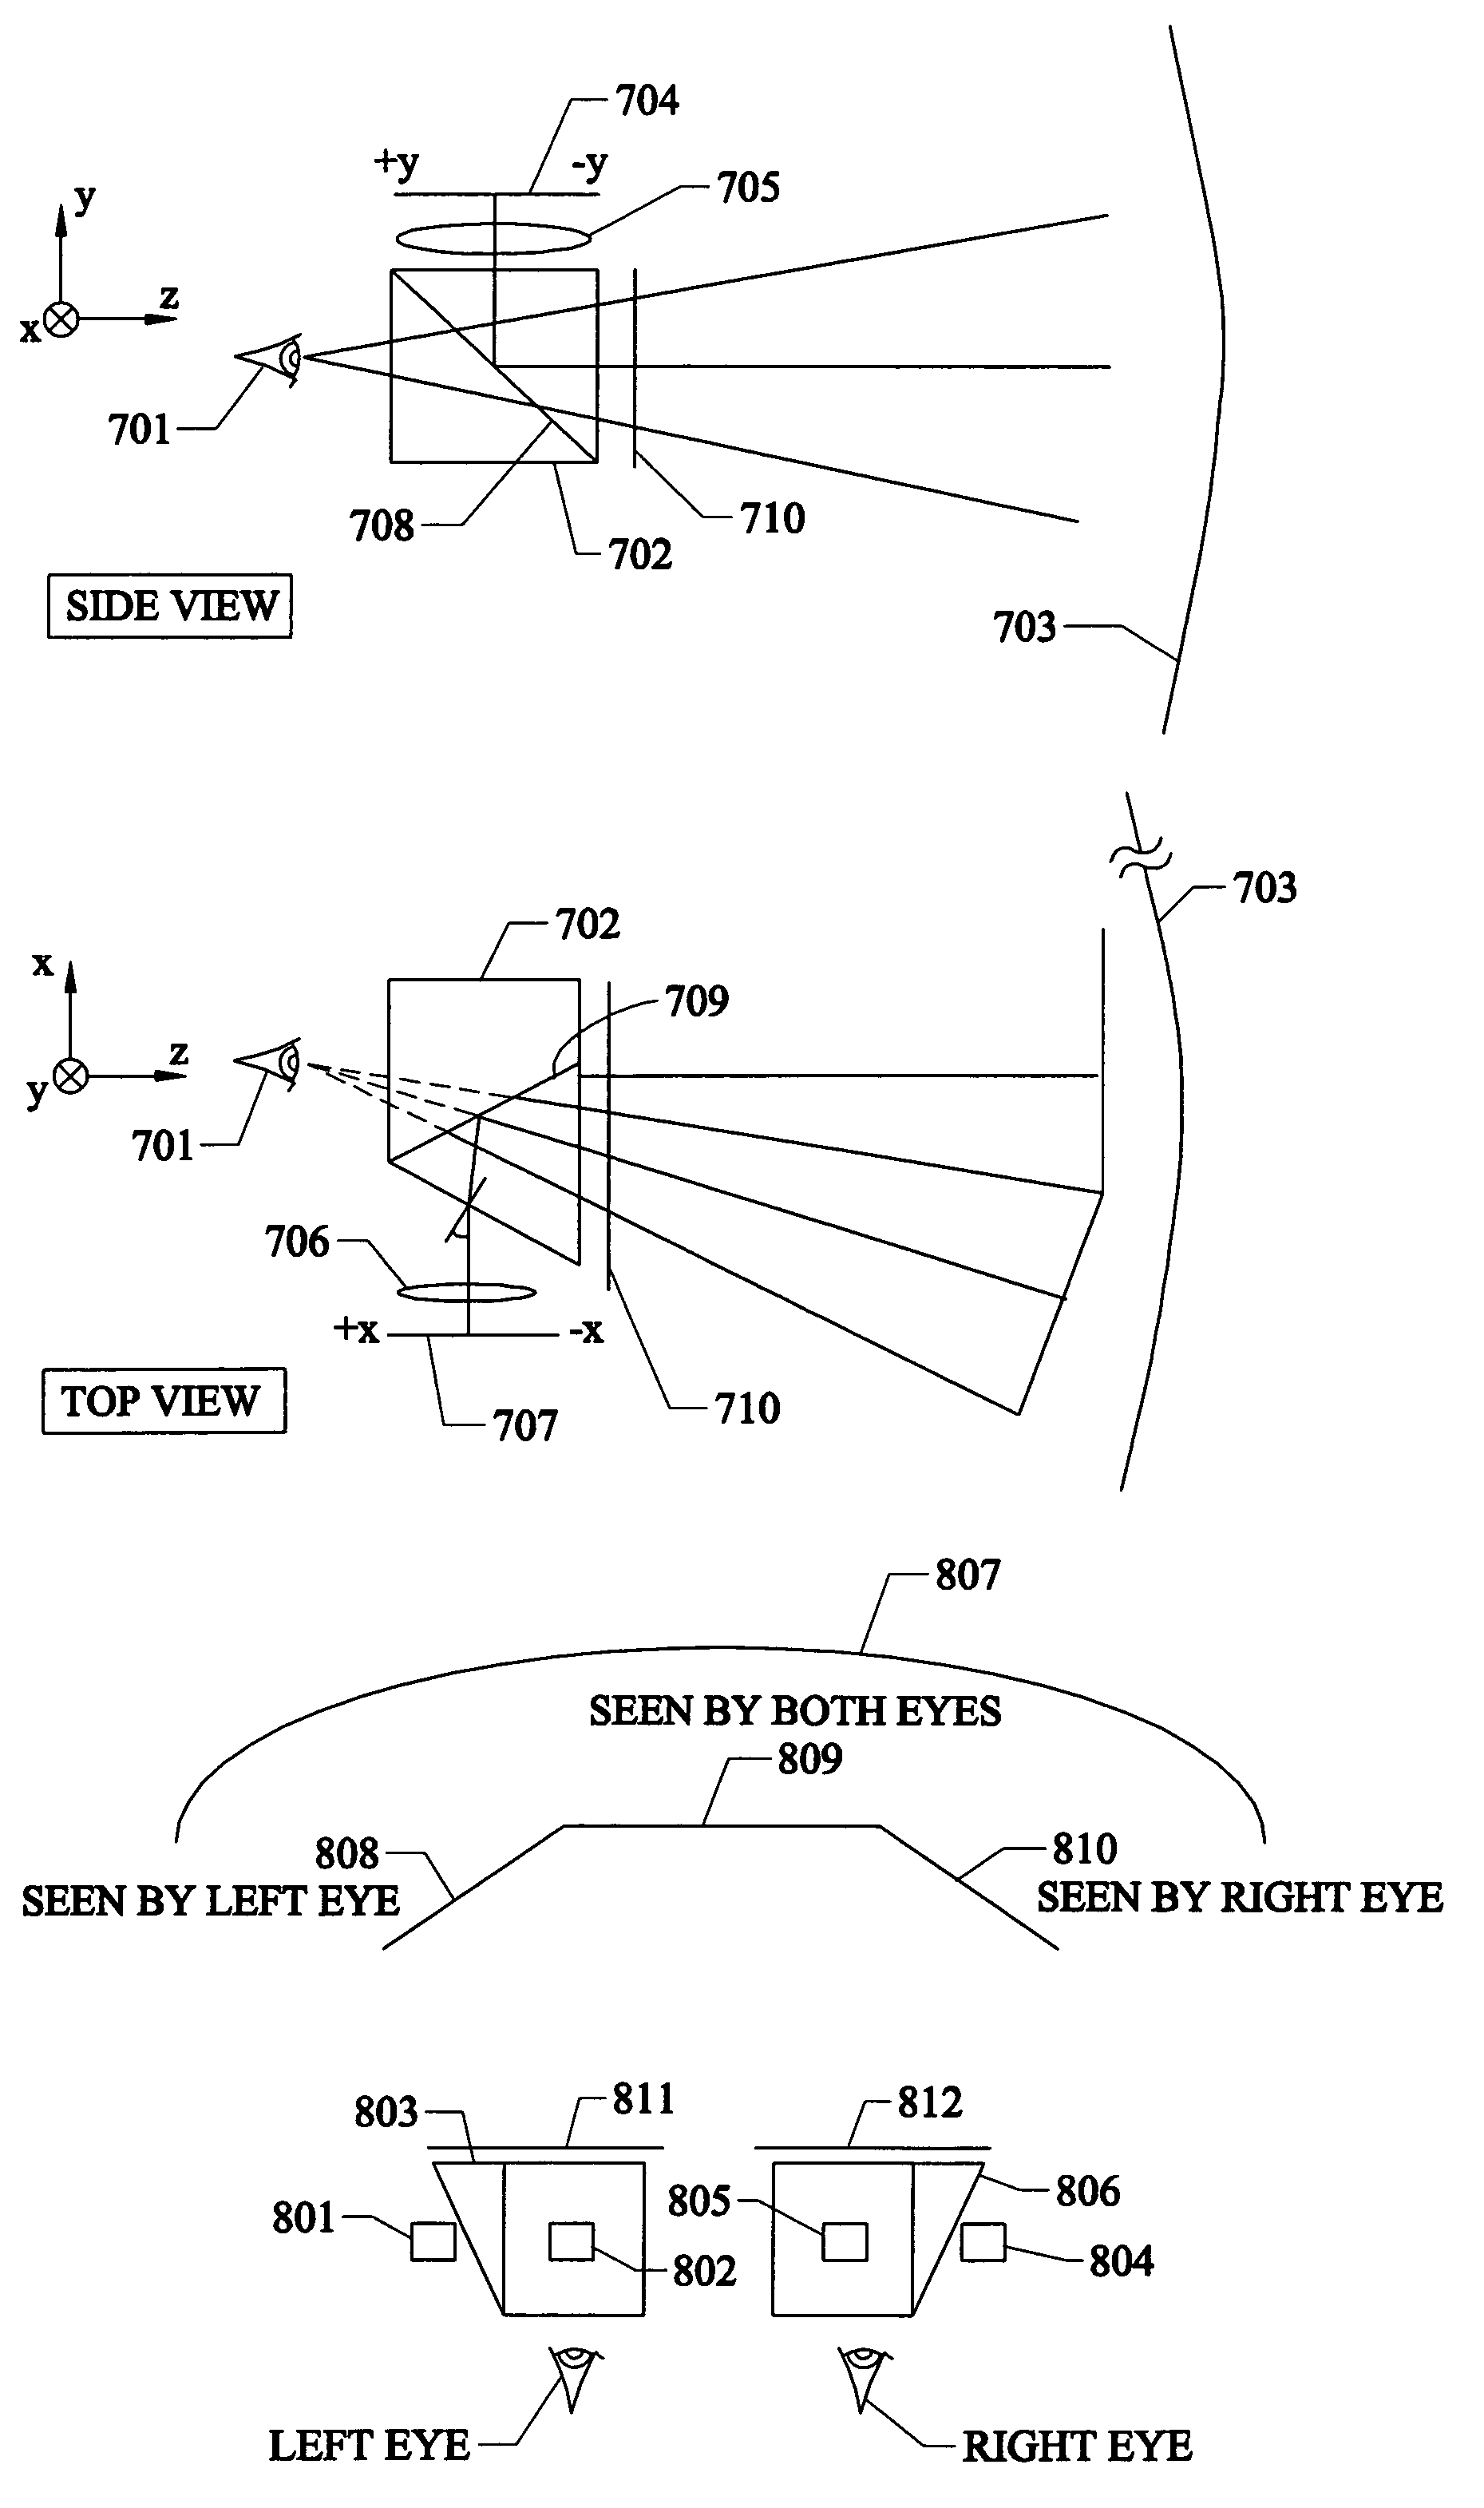 Head mounted projection display with a wide field of view